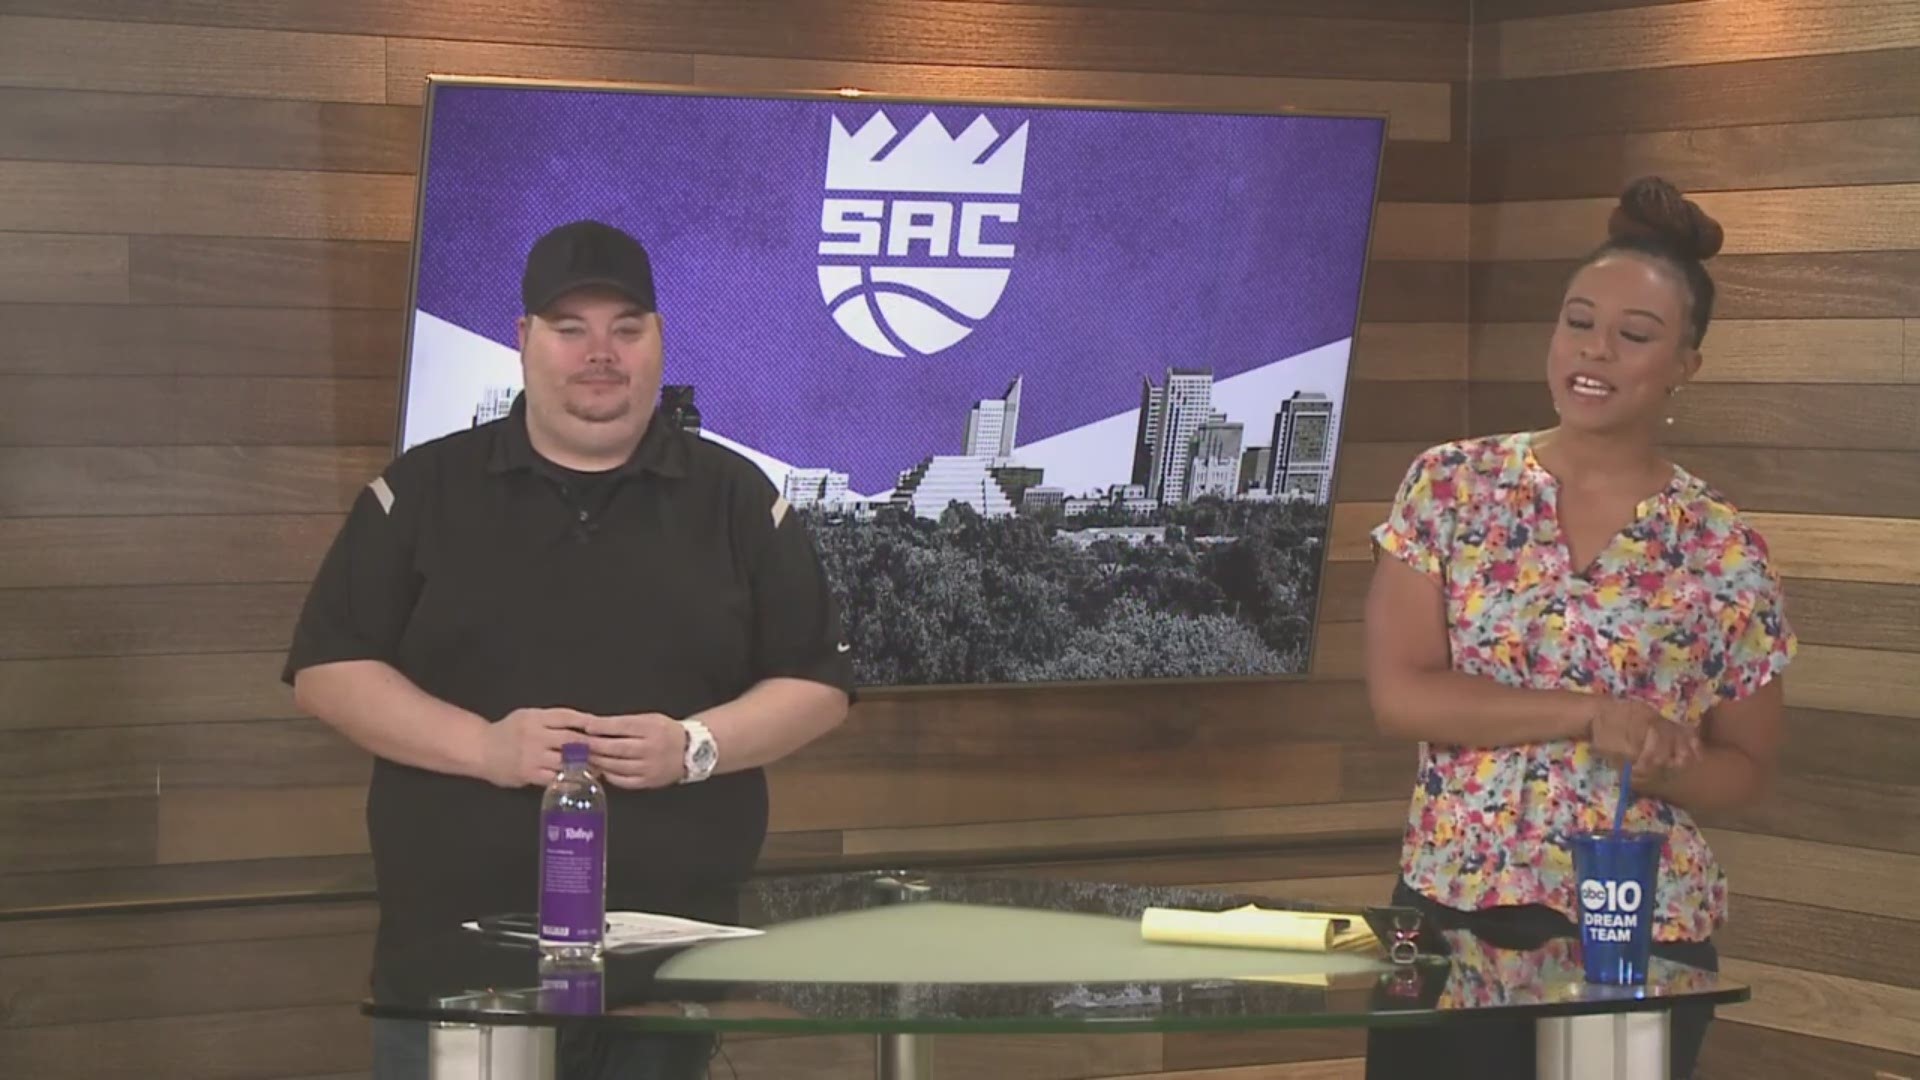 ABC10's Lina Washington and Sean Cunningham discuss the Kings season, which concluded Wednesday in Portland. They discuss the successes and disappointments of the season and the bright future ahead in Sacramento.